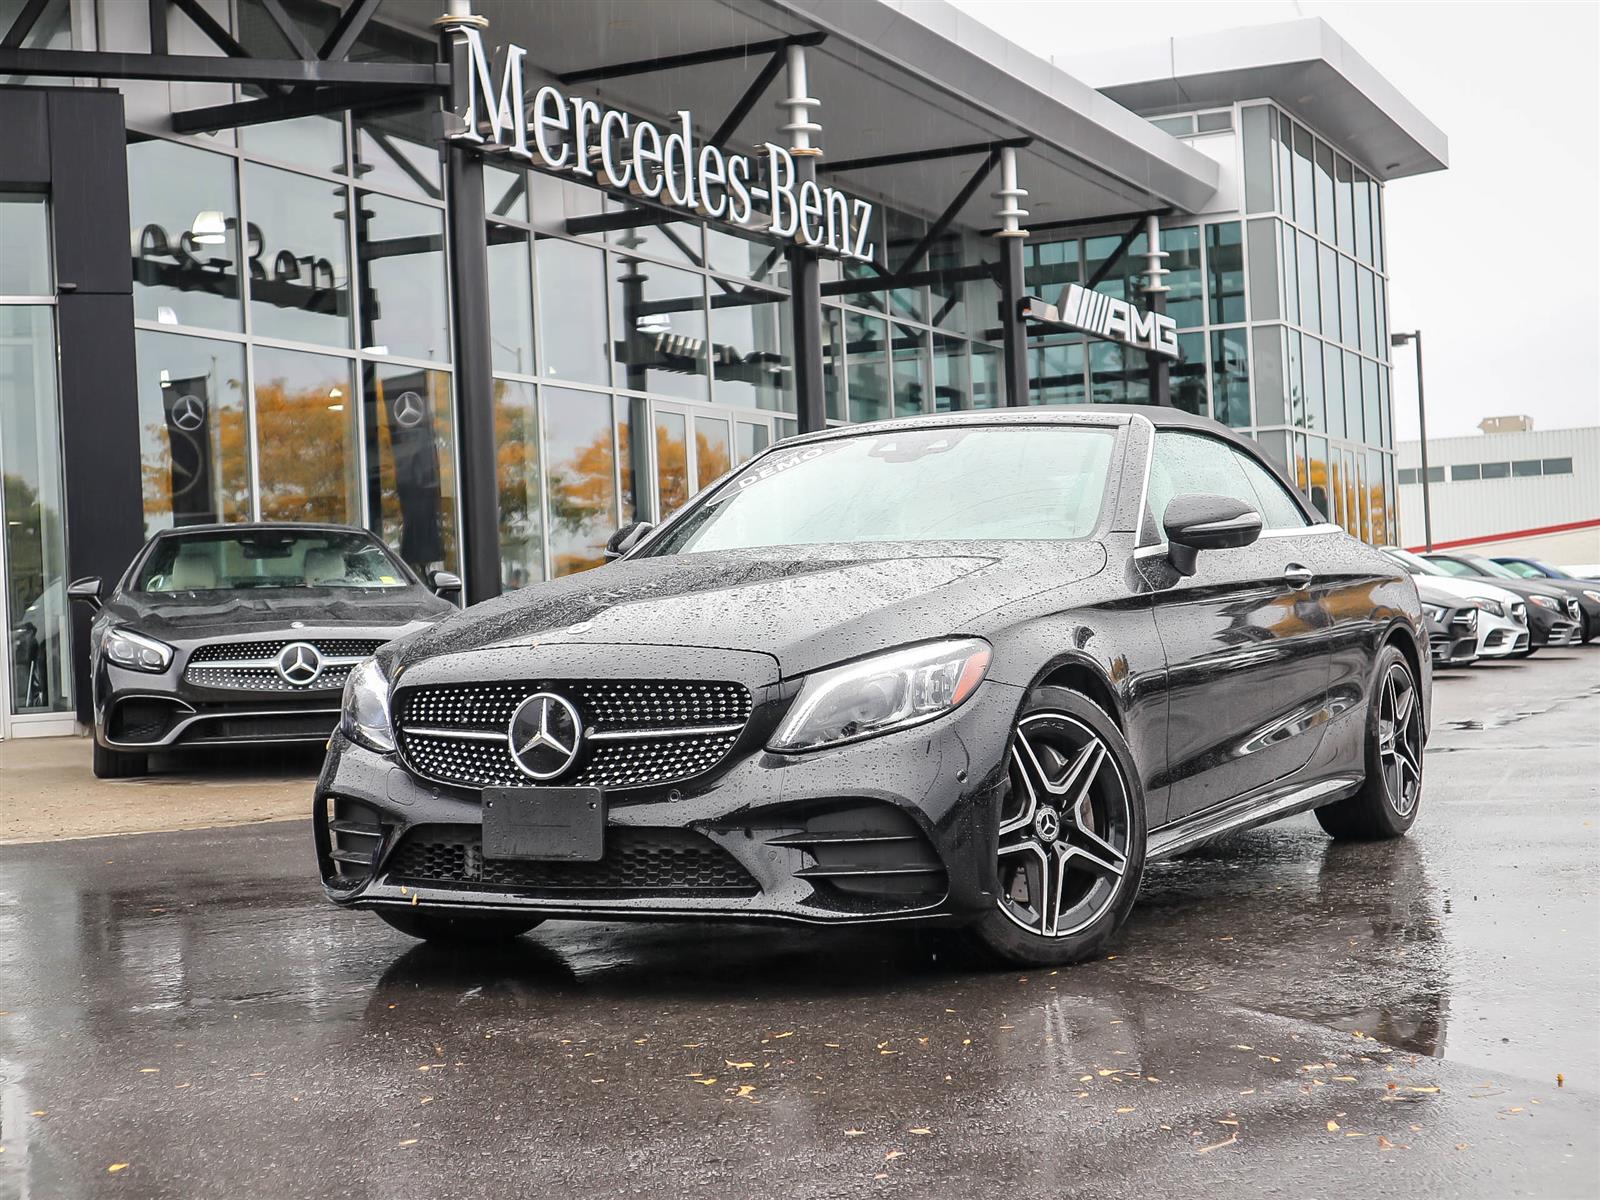 Certified Pre-Owned 2019 Mercedes-Benz C300 4MATIC® Cabriolet Convertible in Ottawa #837791 ...